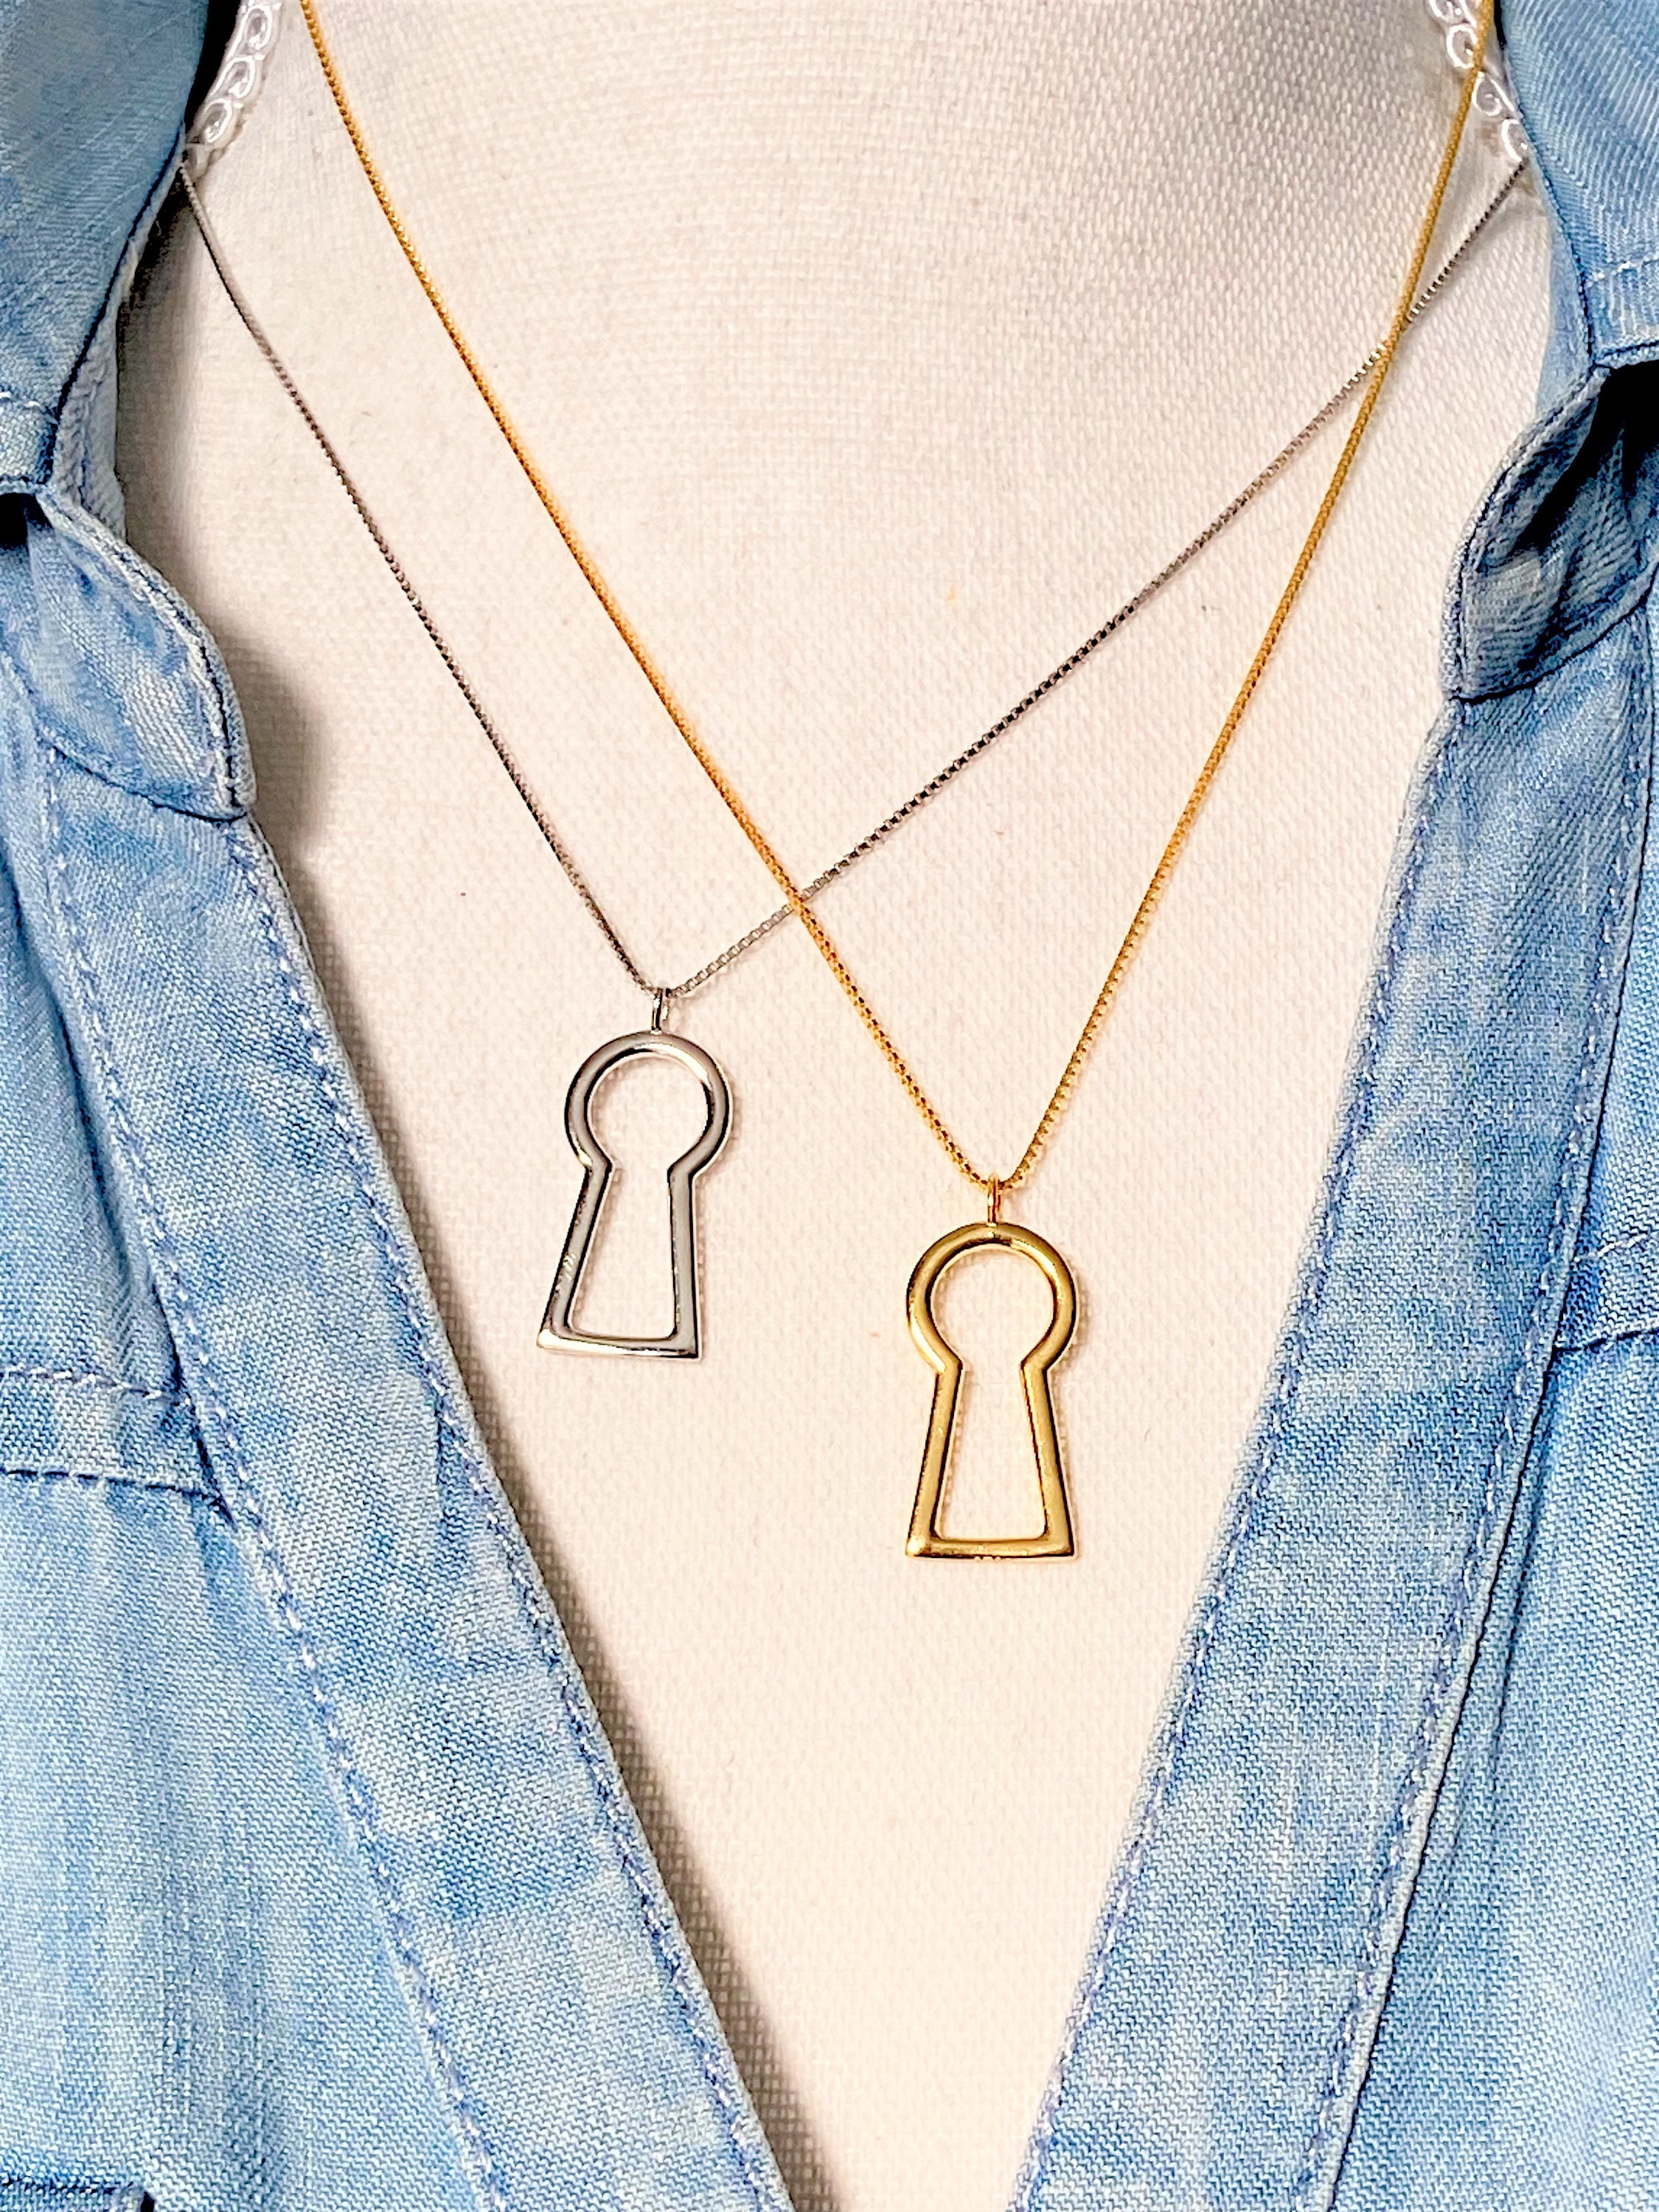 Gold Key Necklace Small Key Necklace Cute Necklaces Pretty 